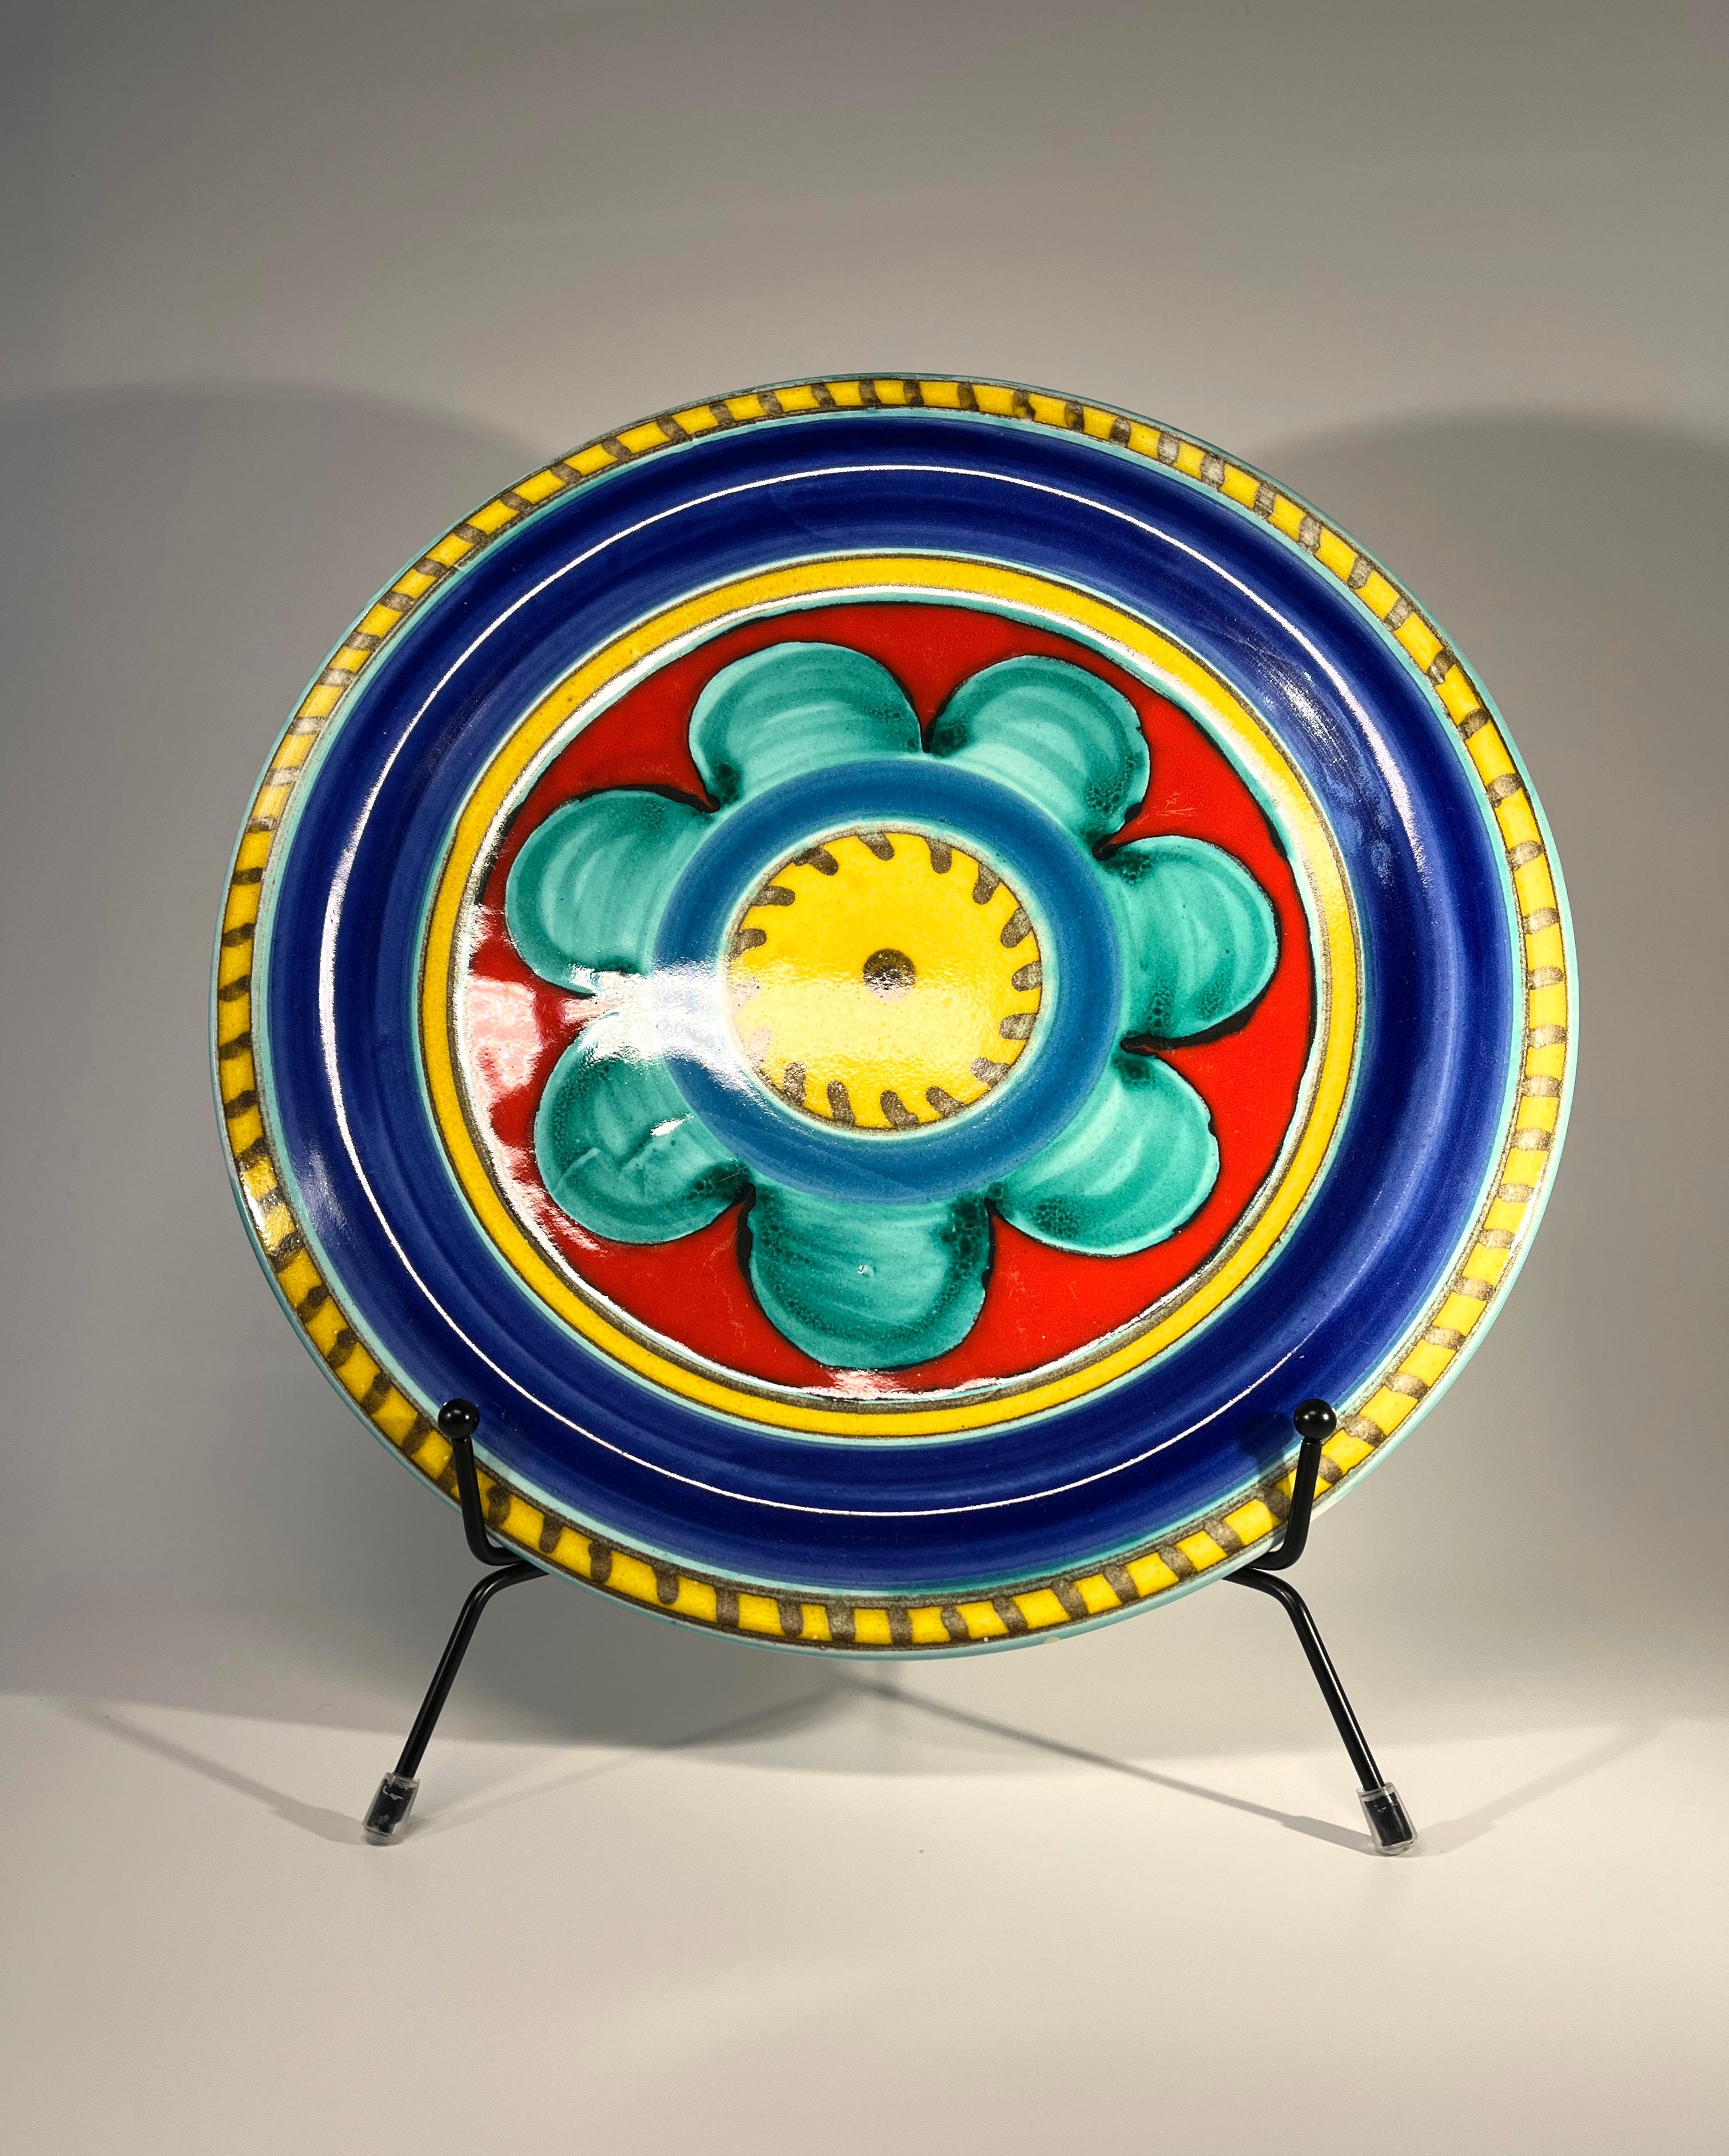 Colorful hand painted, large ceramic plate by DeSimone, Italy
Signed DeSimone, Italy to reverse,
circa 1960s
Measures: Height 1 inch, diameter 10 inch
In very good condition.